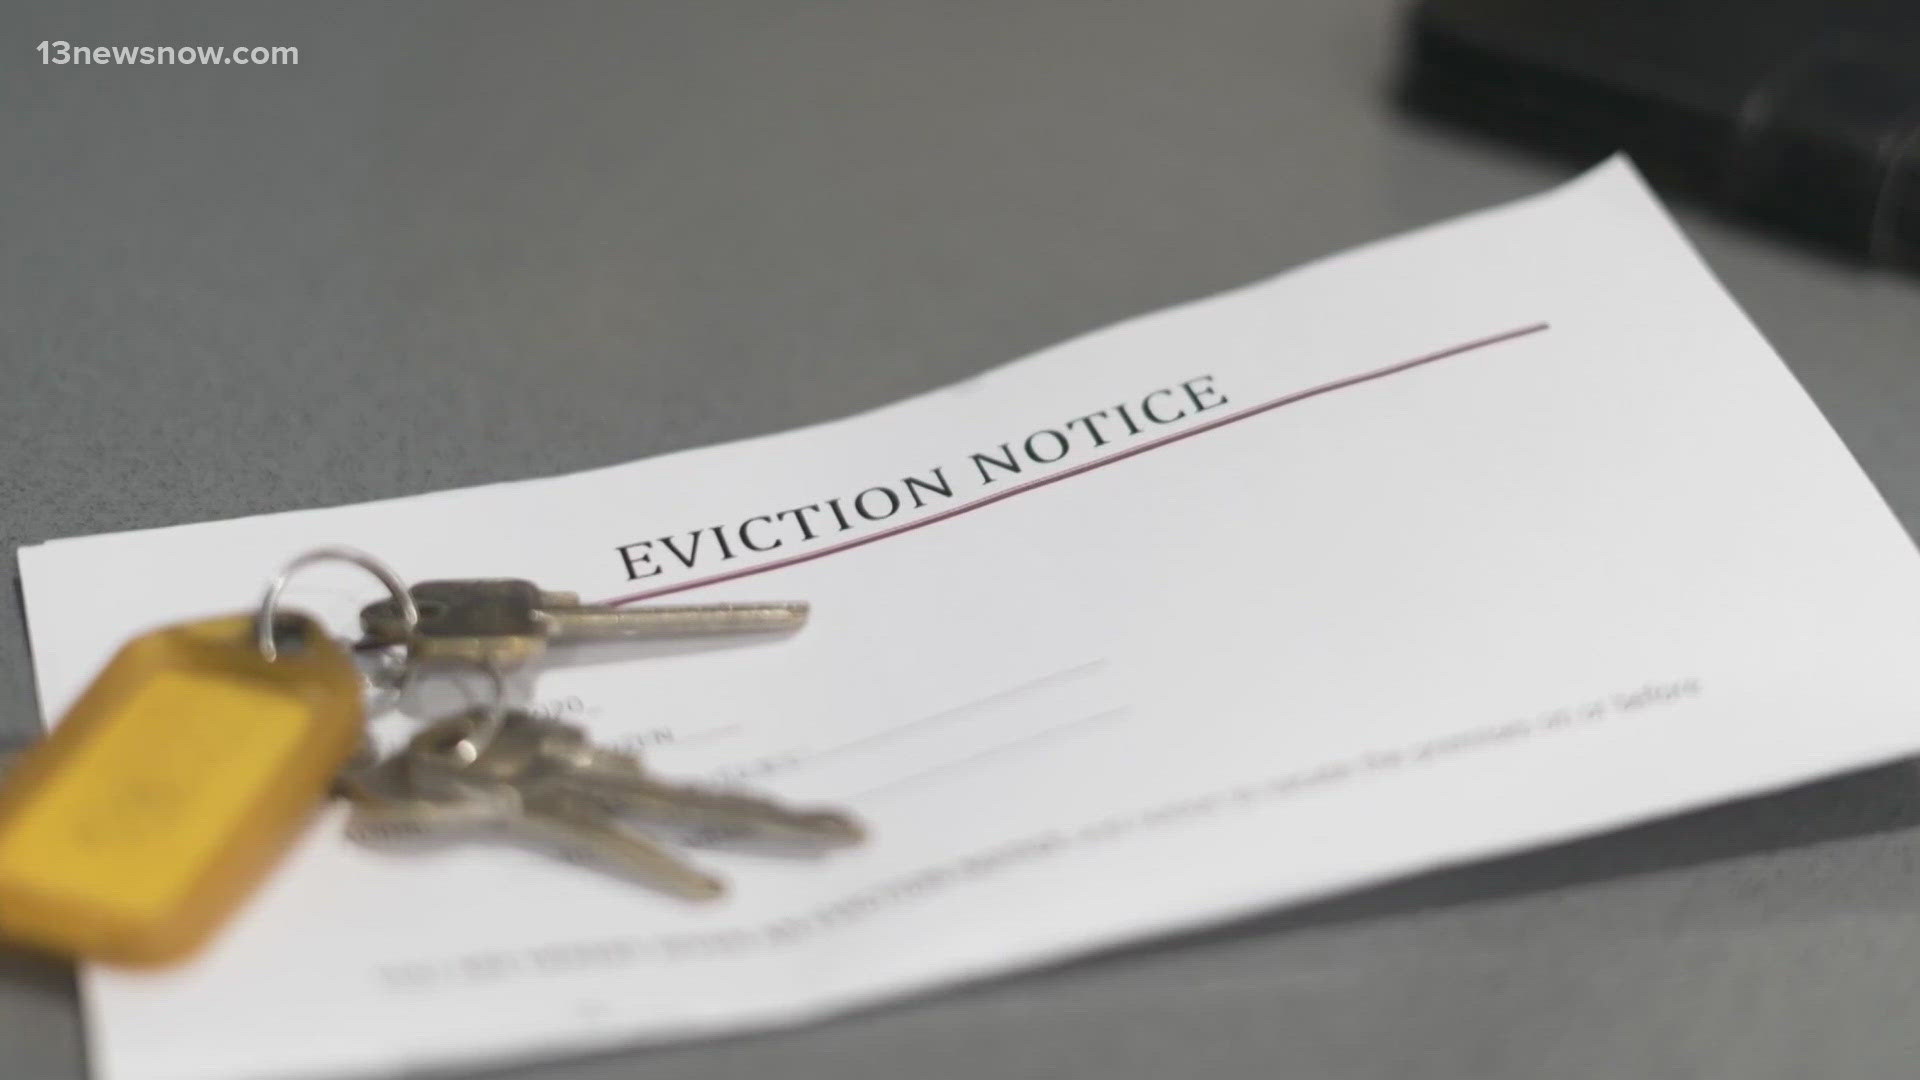 The Virginia Poverty Law Center recently launched the "Eviction Defense Center".